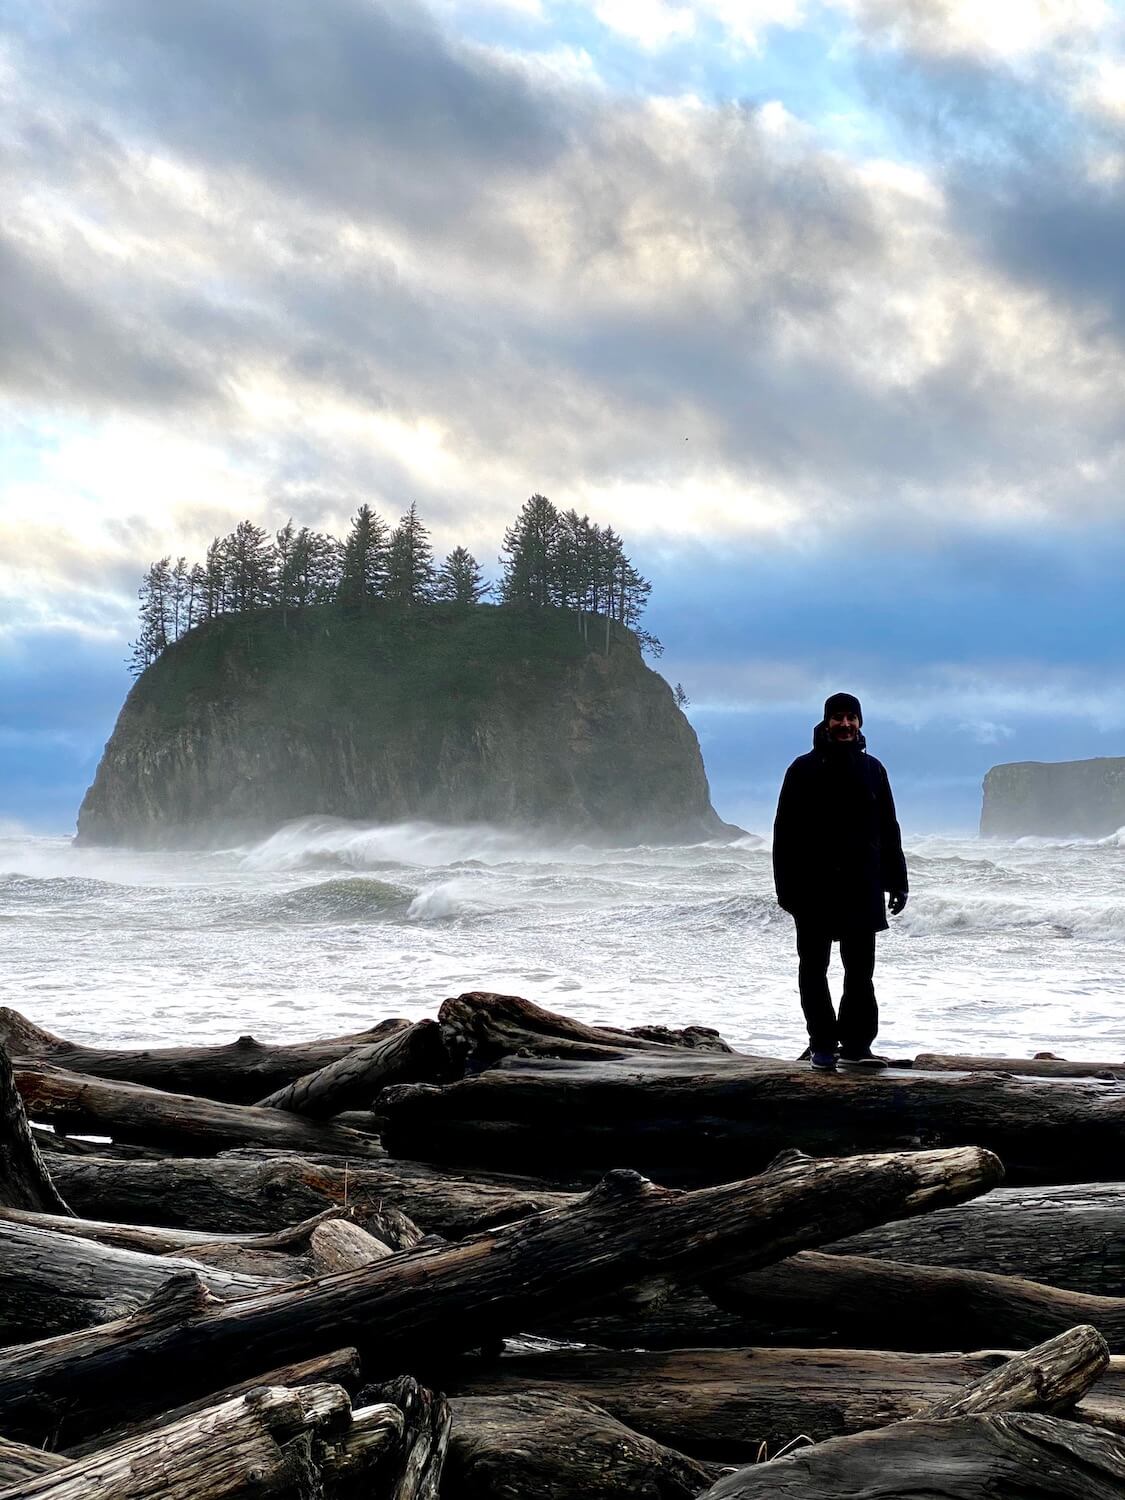 A beach scene of the Pacific Ocean waves crashing on a barricade of drift logs with a man dressed in black standing on one of the logs. A large rocky island in the background has fir trees growing on top. The sky is blue with a swirl of angry clouds.